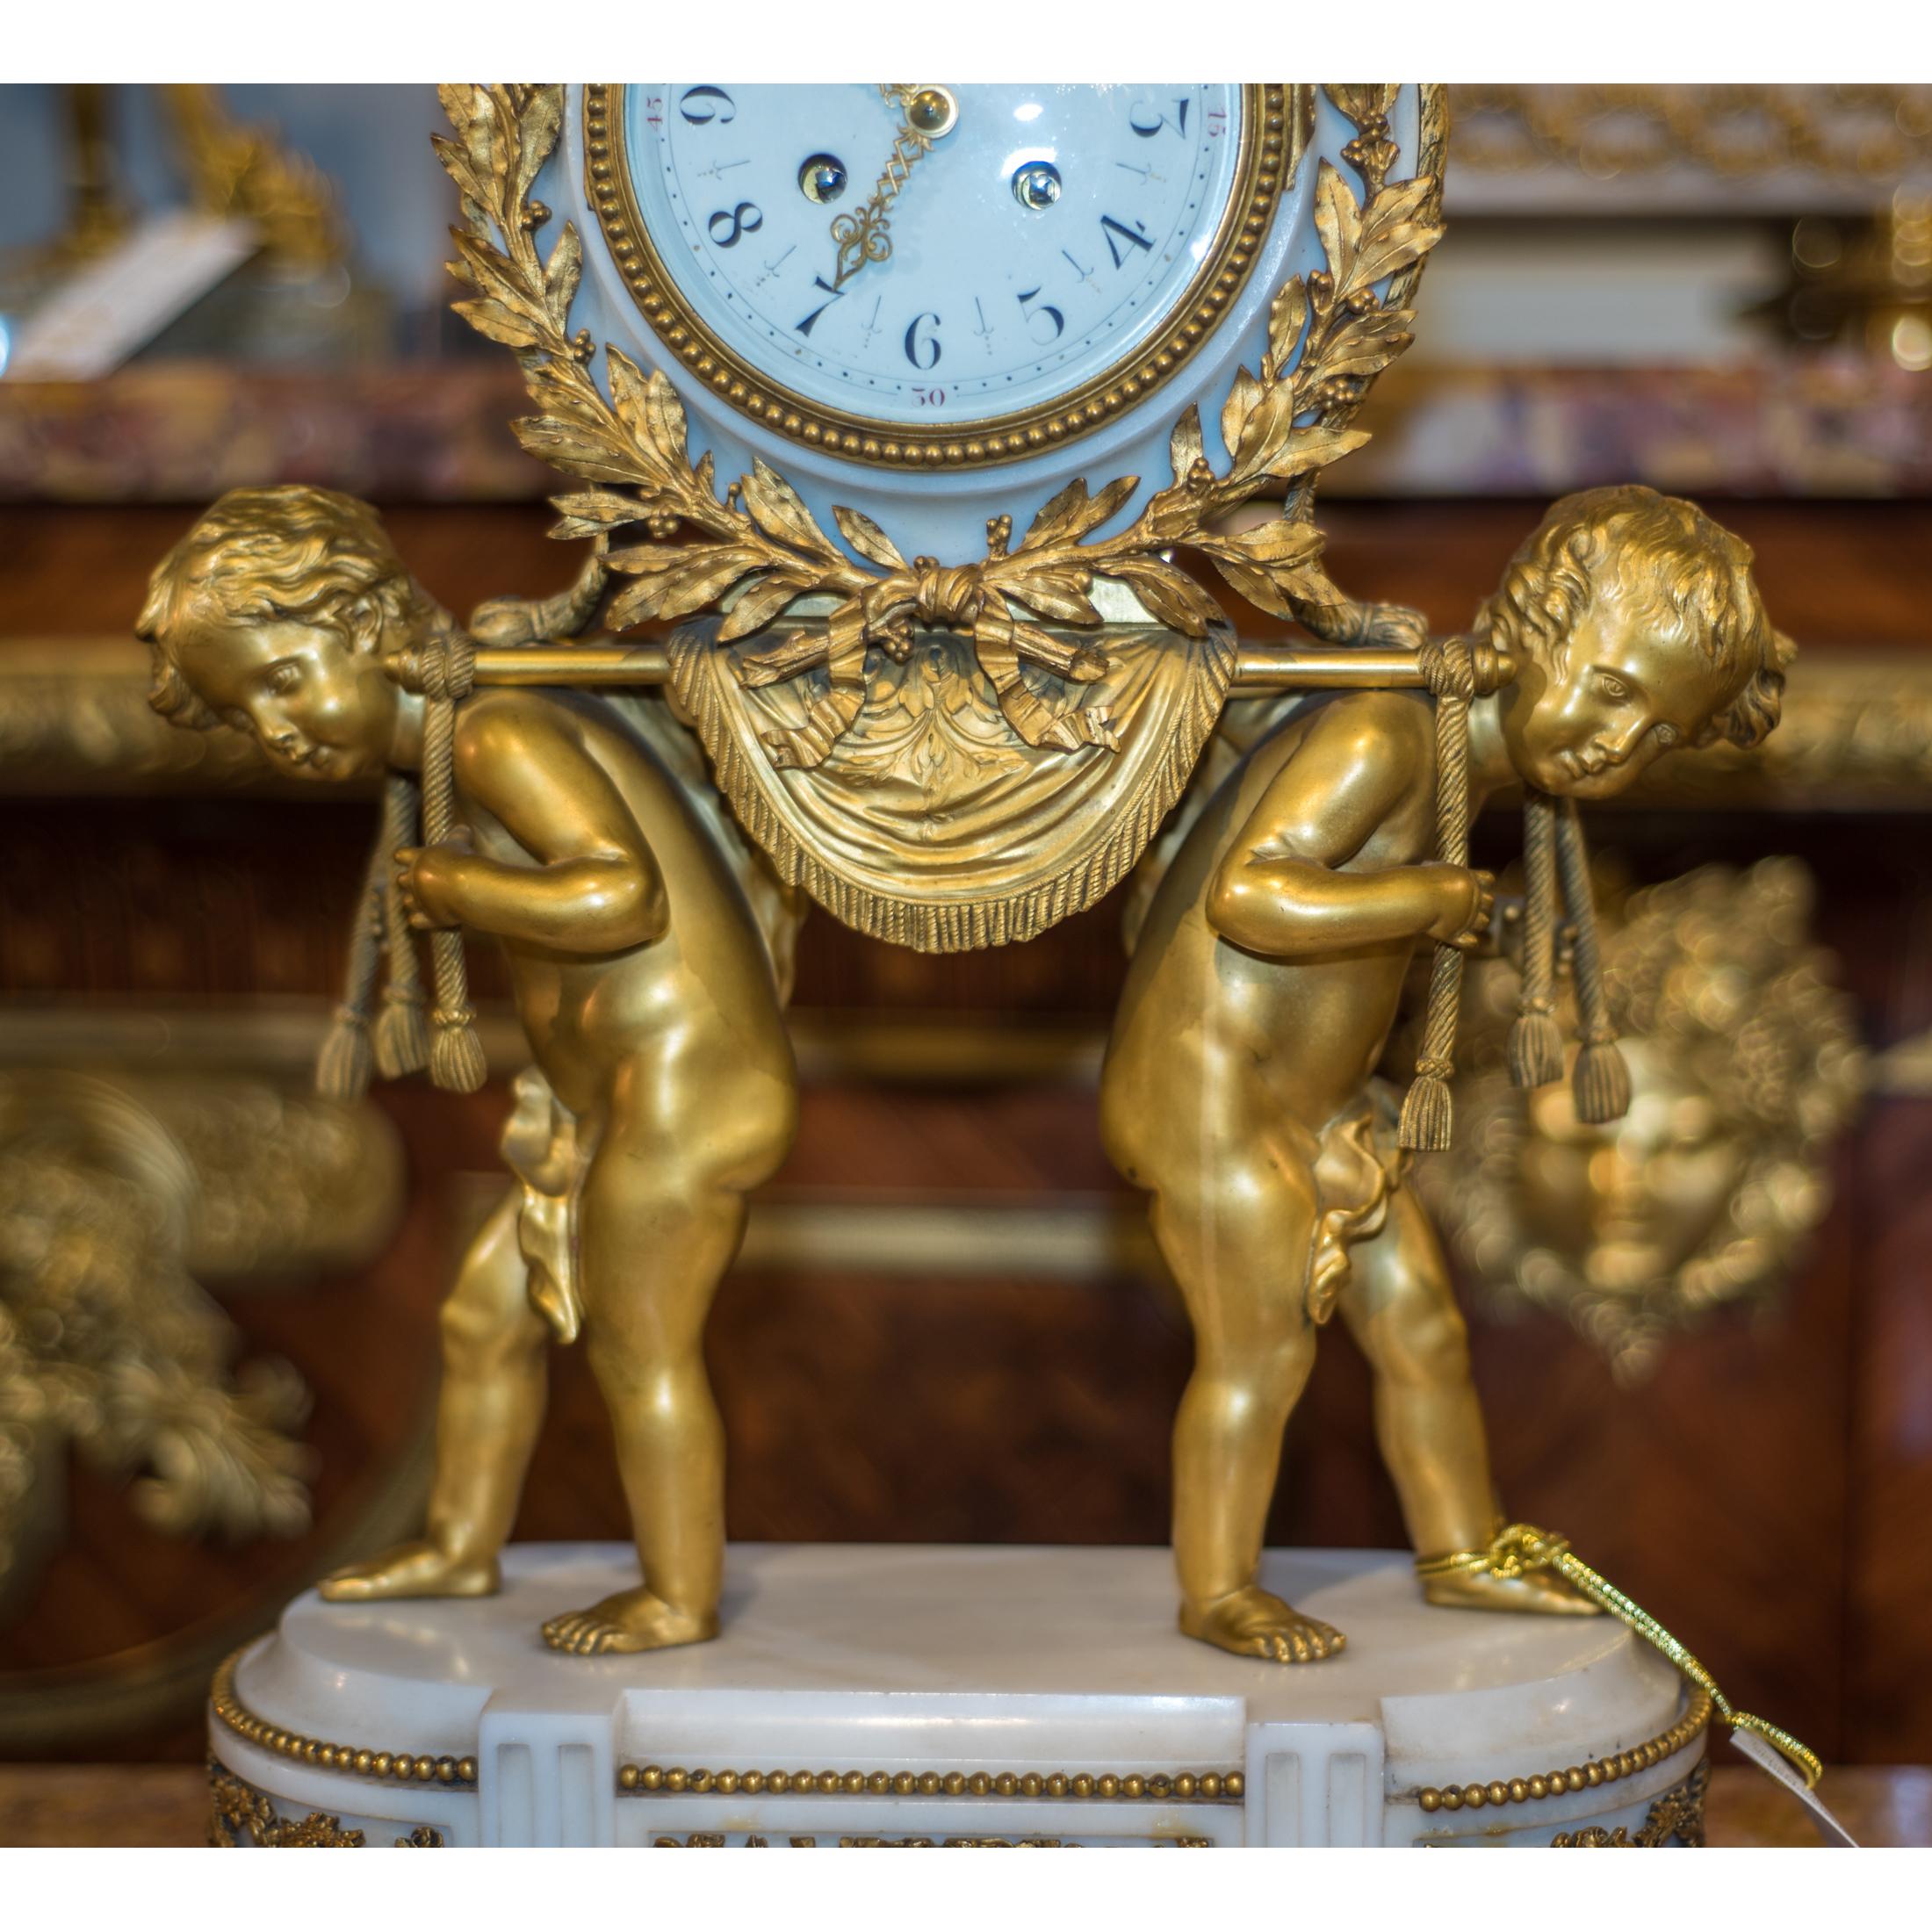 A very fine french ormolu and white marble three-piece clock set garniture. Comprising a mantel clock and a pair of matching urns with a pair of putti on an oval white marble base.

Origin: French
Date: circa 1890
Dimension: Clock 23 x 13 1/2 x